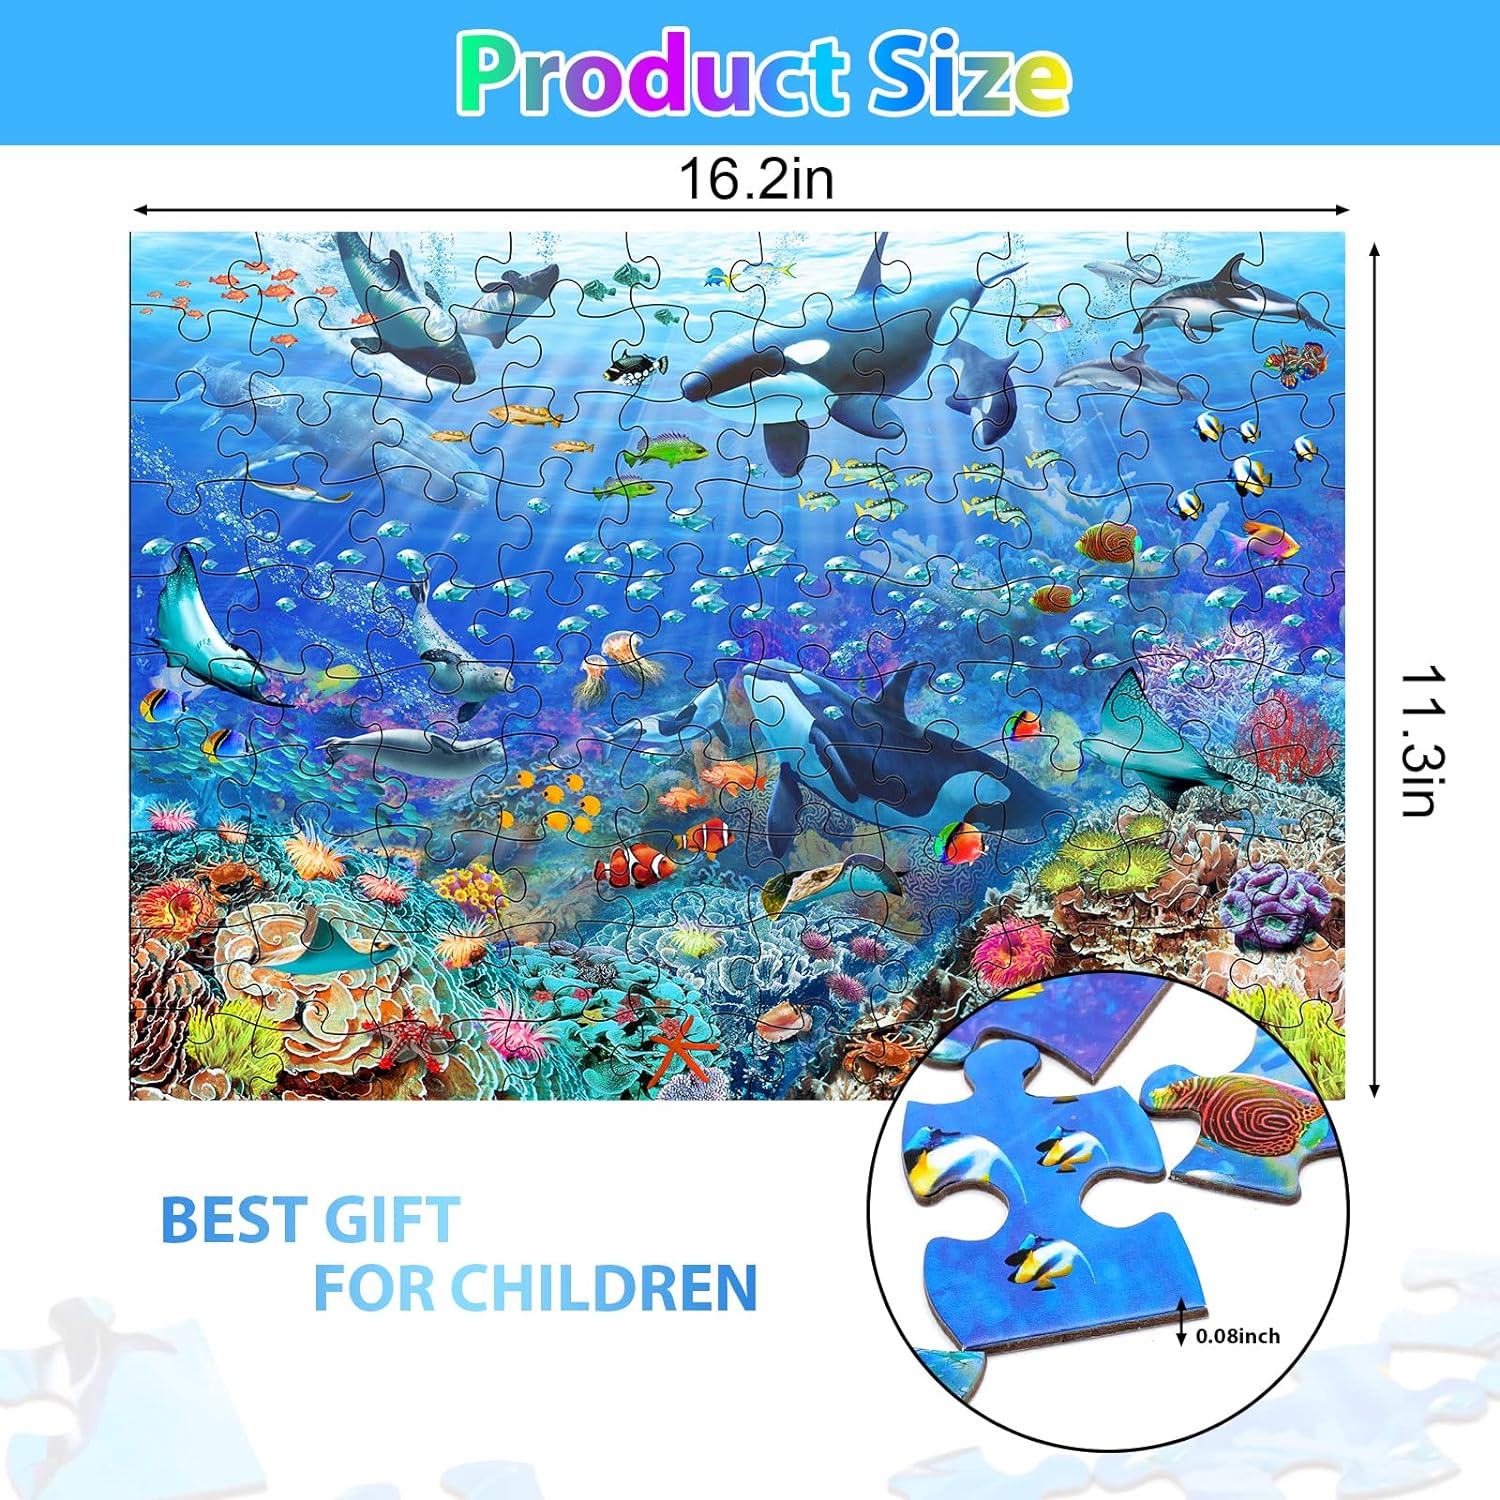 Underwater Scene - 100 Piece Jigsaw Puzzle for Kids: A Fun and Educational Review